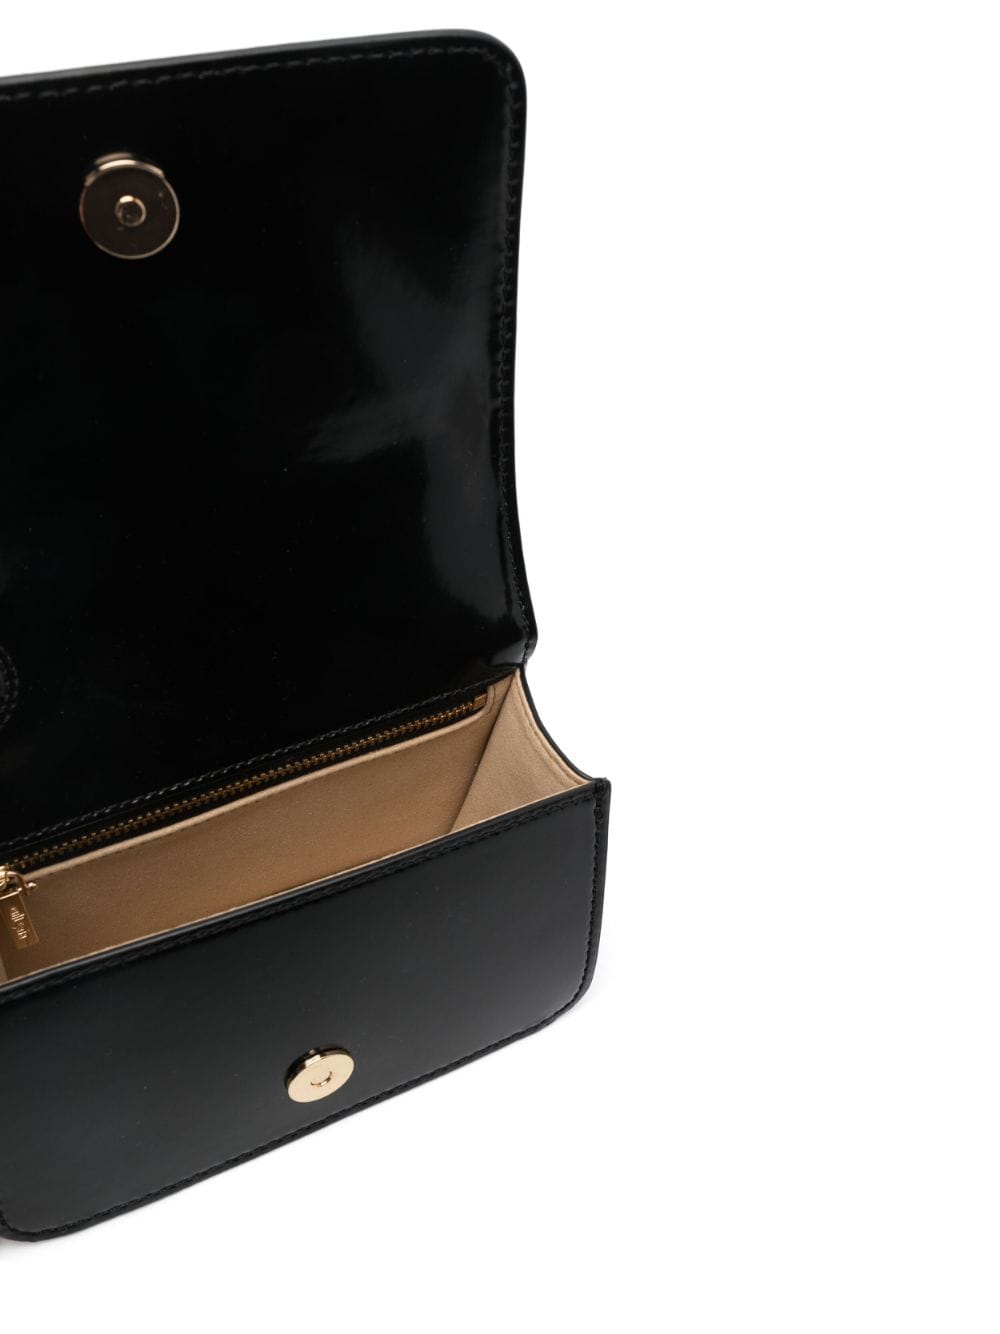 Sold - ALDO Patent Leather Black Clutch Bag with Gold Hardware